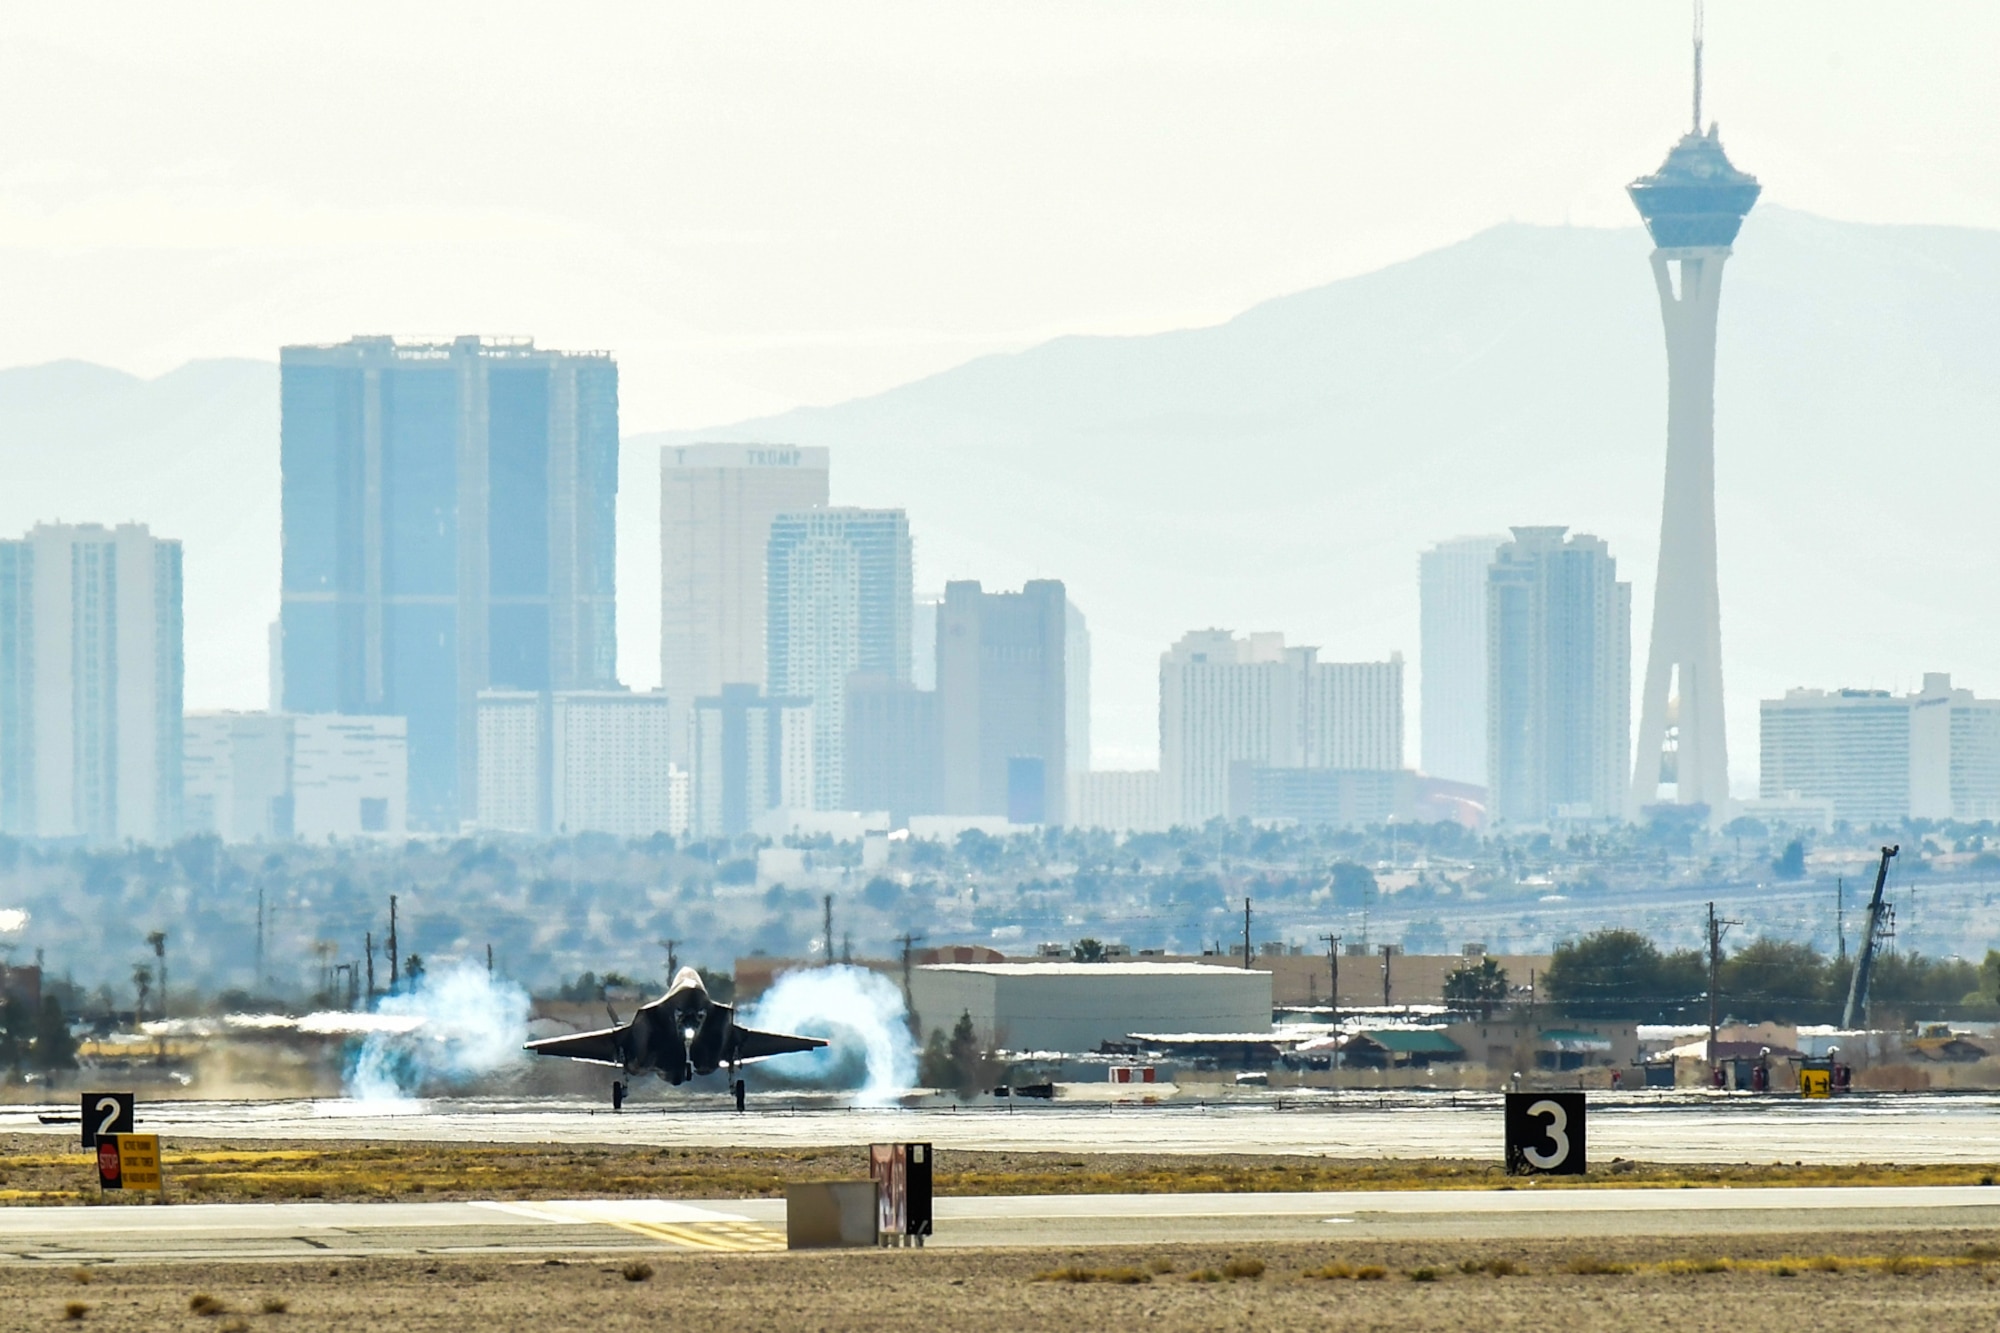 An F-35A Lightning II aircraft from Hill Air Force Base, Utah, takes off from Nellis AFB, Nevada, Feb. 2. Airmen from the 388th and 419th Fighter Wings at Hill are participating in Red Flag 17-01. Red Flag is the U.S. Air Force’s premier air-to-air combat training exercise. This is the first F-35A deployment to Red Flag since the Air Force declared the jet combat ready in August 2016. (U.S. Air Force photo/R. Nial Bradshaw)